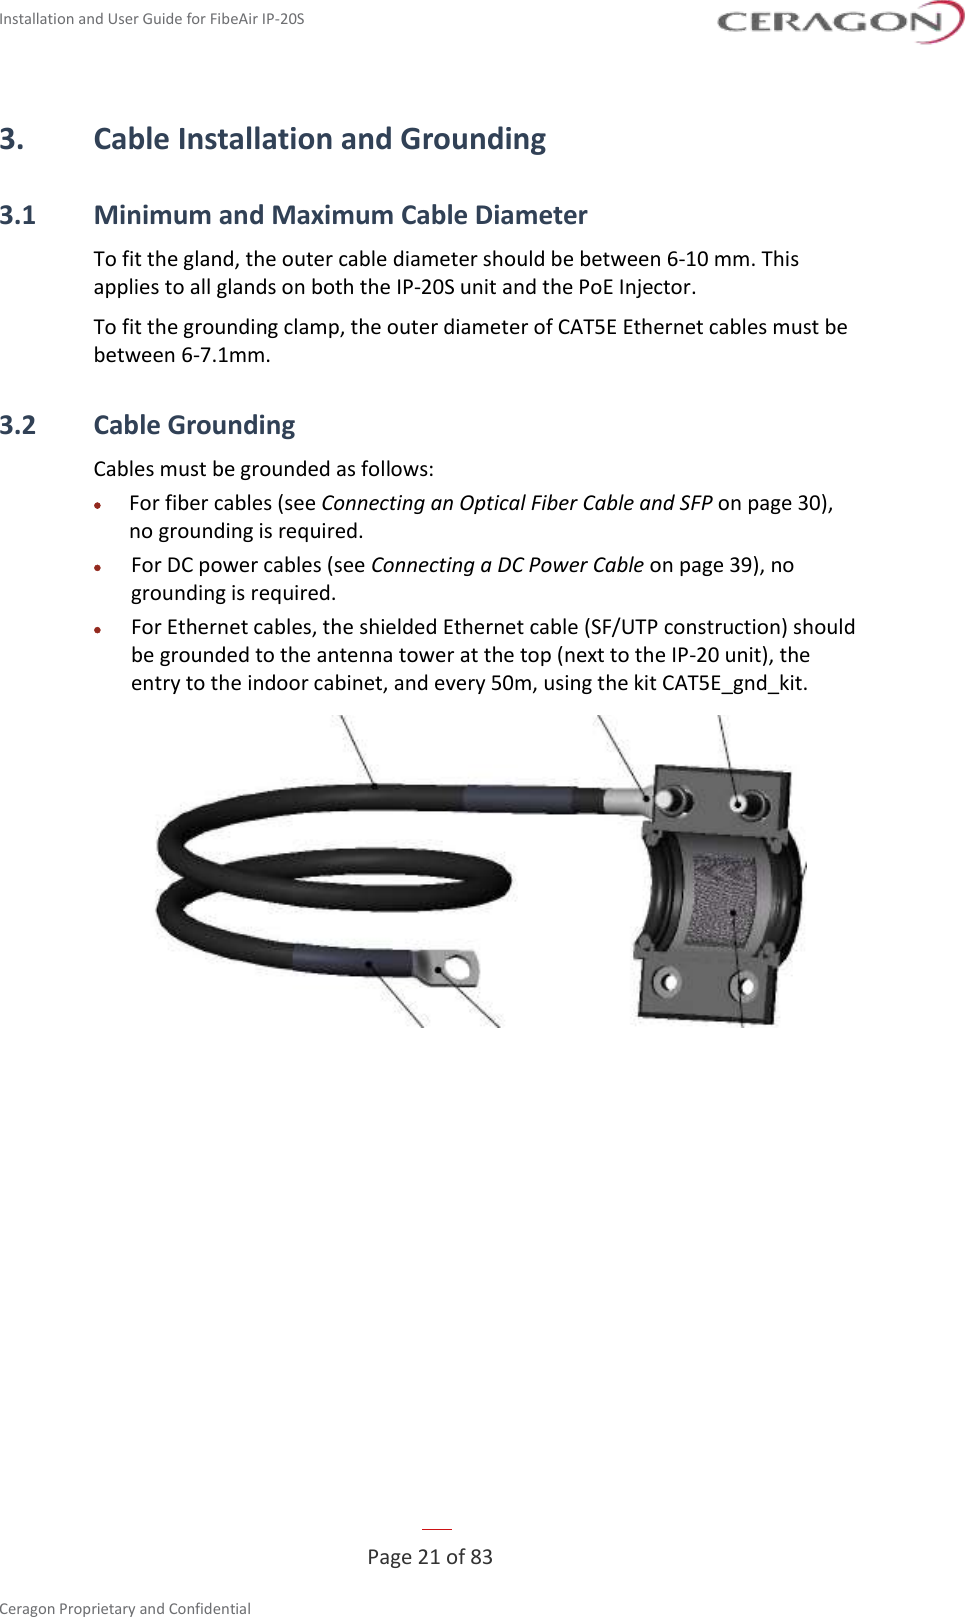 Installation and User Guide for FibeAir IP-20S   Page 21 of 83  Ceragon Proprietary and Confidential     3. Cable Installation and Grounding 3.1 Minimum and Maximum Cable Diameter To fit the gland, the outer cable diameter should be between 6-10 mm. This applies to all glands on both the IP-20S unit and the PoE Injector. To fit the grounding clamp, the outer diameter of CAT5E Ethernet cables must be between 6-7.1mm. 3.2 Cable Grounding Cables must be grounded as follows: • For fiber cables (see Connecting an Optical Fiber Cable and SFP on page 30), no grounding is required. • For DC power cables (see Connecting a DC Power Cable on page 39), no grounding is required. • For Ethernet cables, the shielded Ethernet cable (SF/UTP construction) should be grounded to the antenna tower at the top (next to the IP-20 unit), the entry to the indoor cabinet, and every 50m, using the kit CAT5E_gnd_kit.  